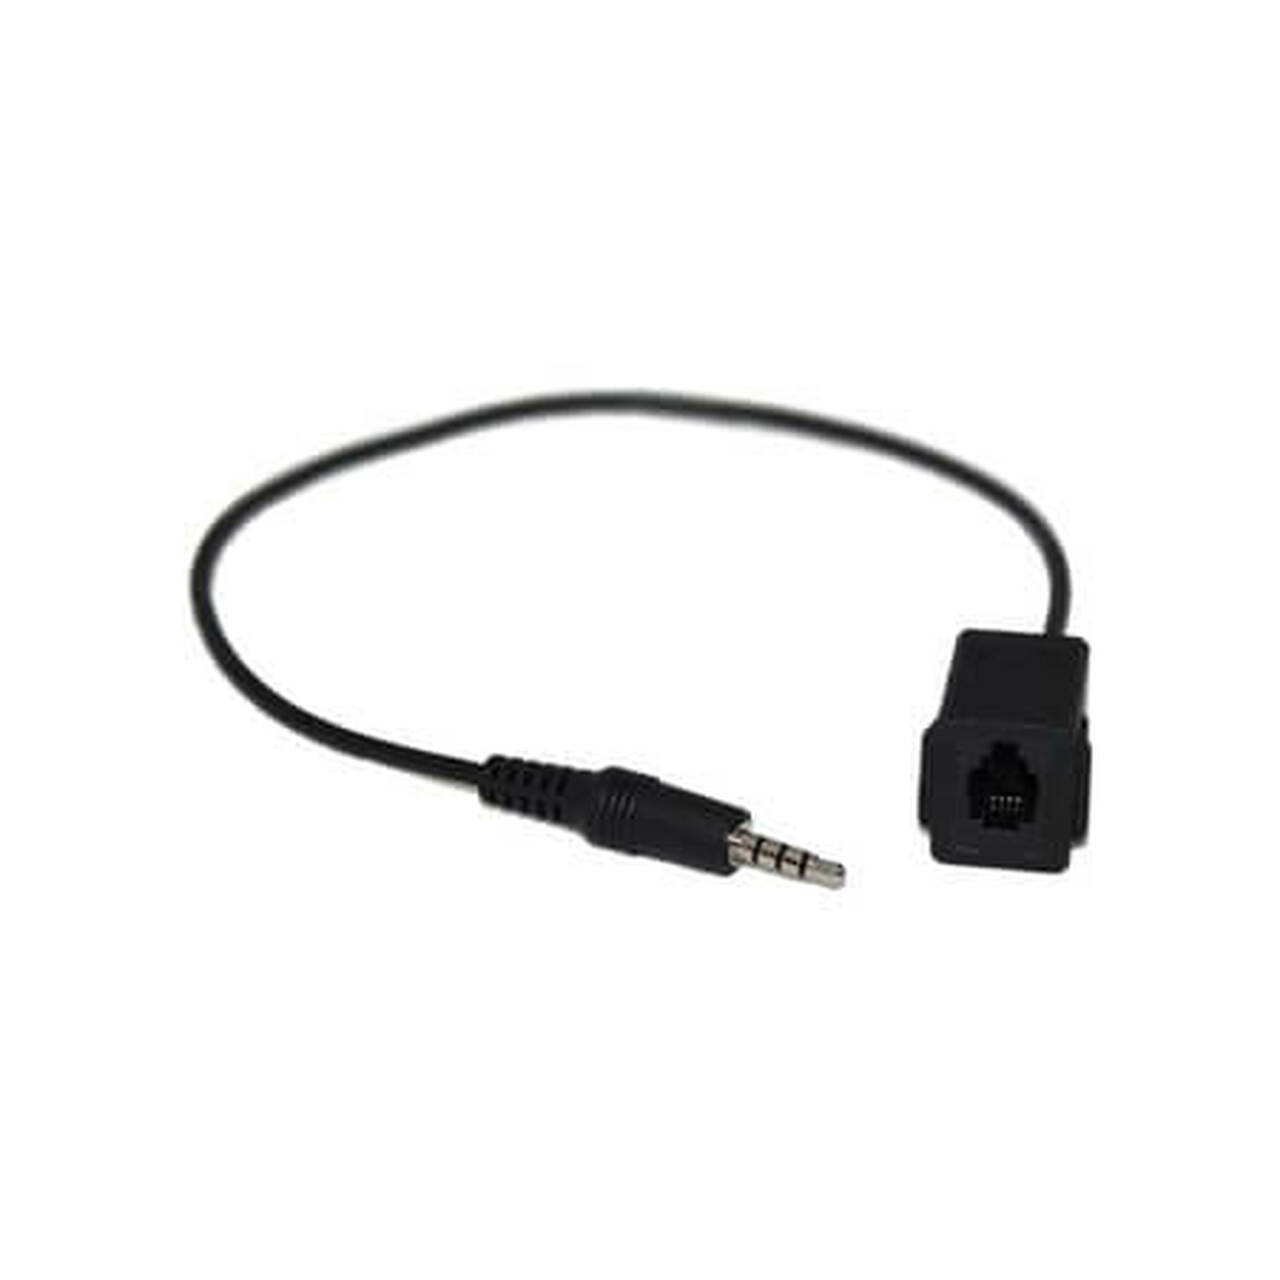 Headset Buddy RJ9-PH35 - Female RJ9 Headset to Male 3.5mm Adapter for iPhone and Smartphones